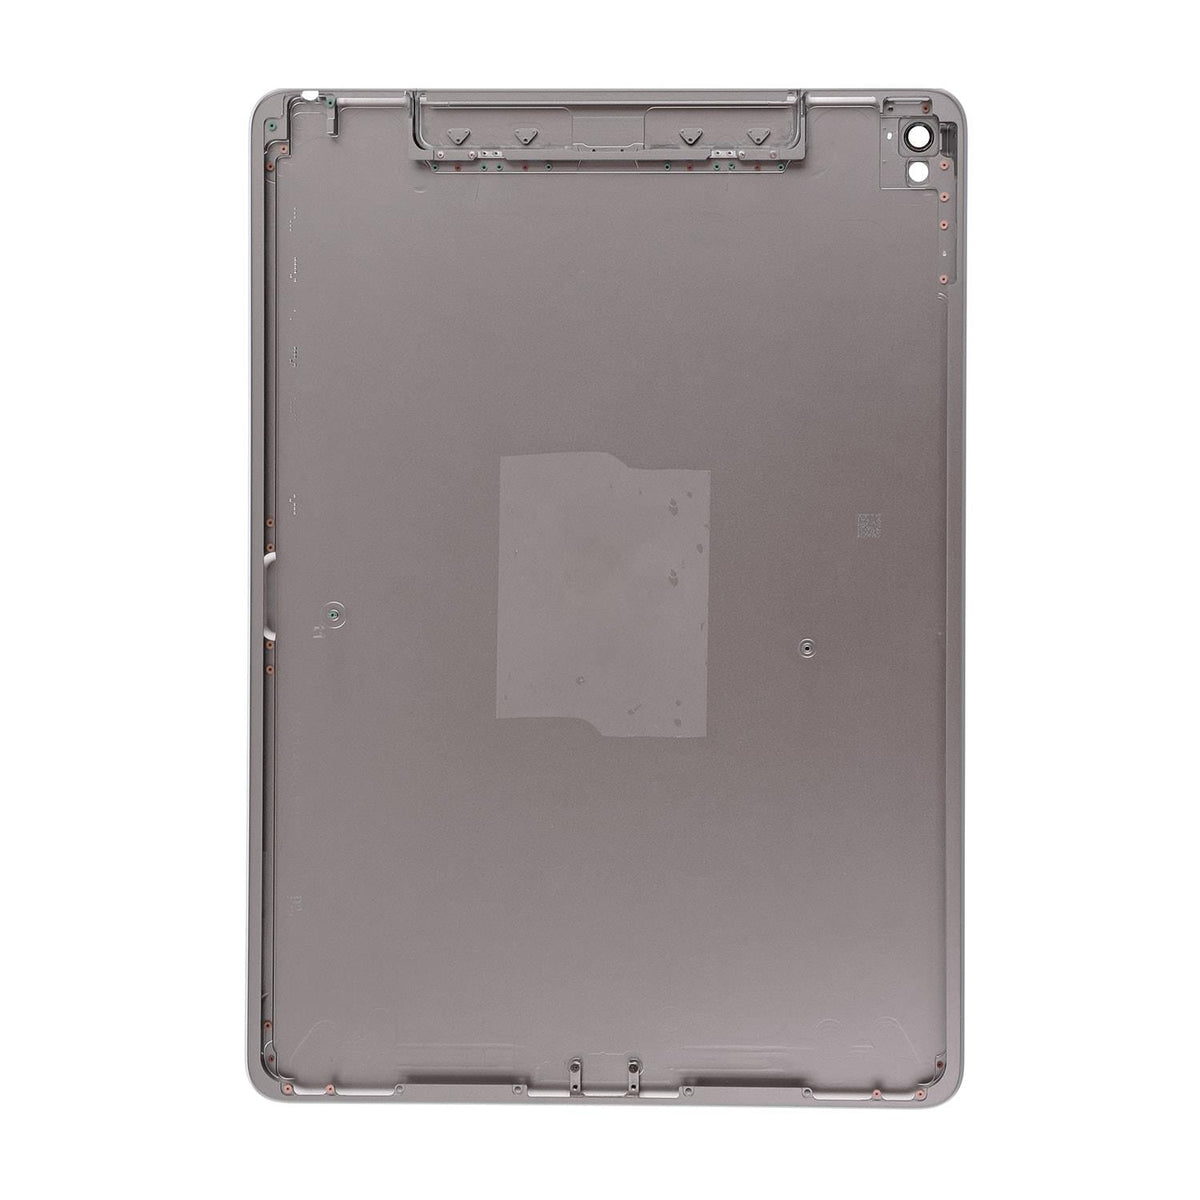 BACK COVER WIFI + CELLULAR VERSION FOR IPAD PRO 9.7"- GRAY